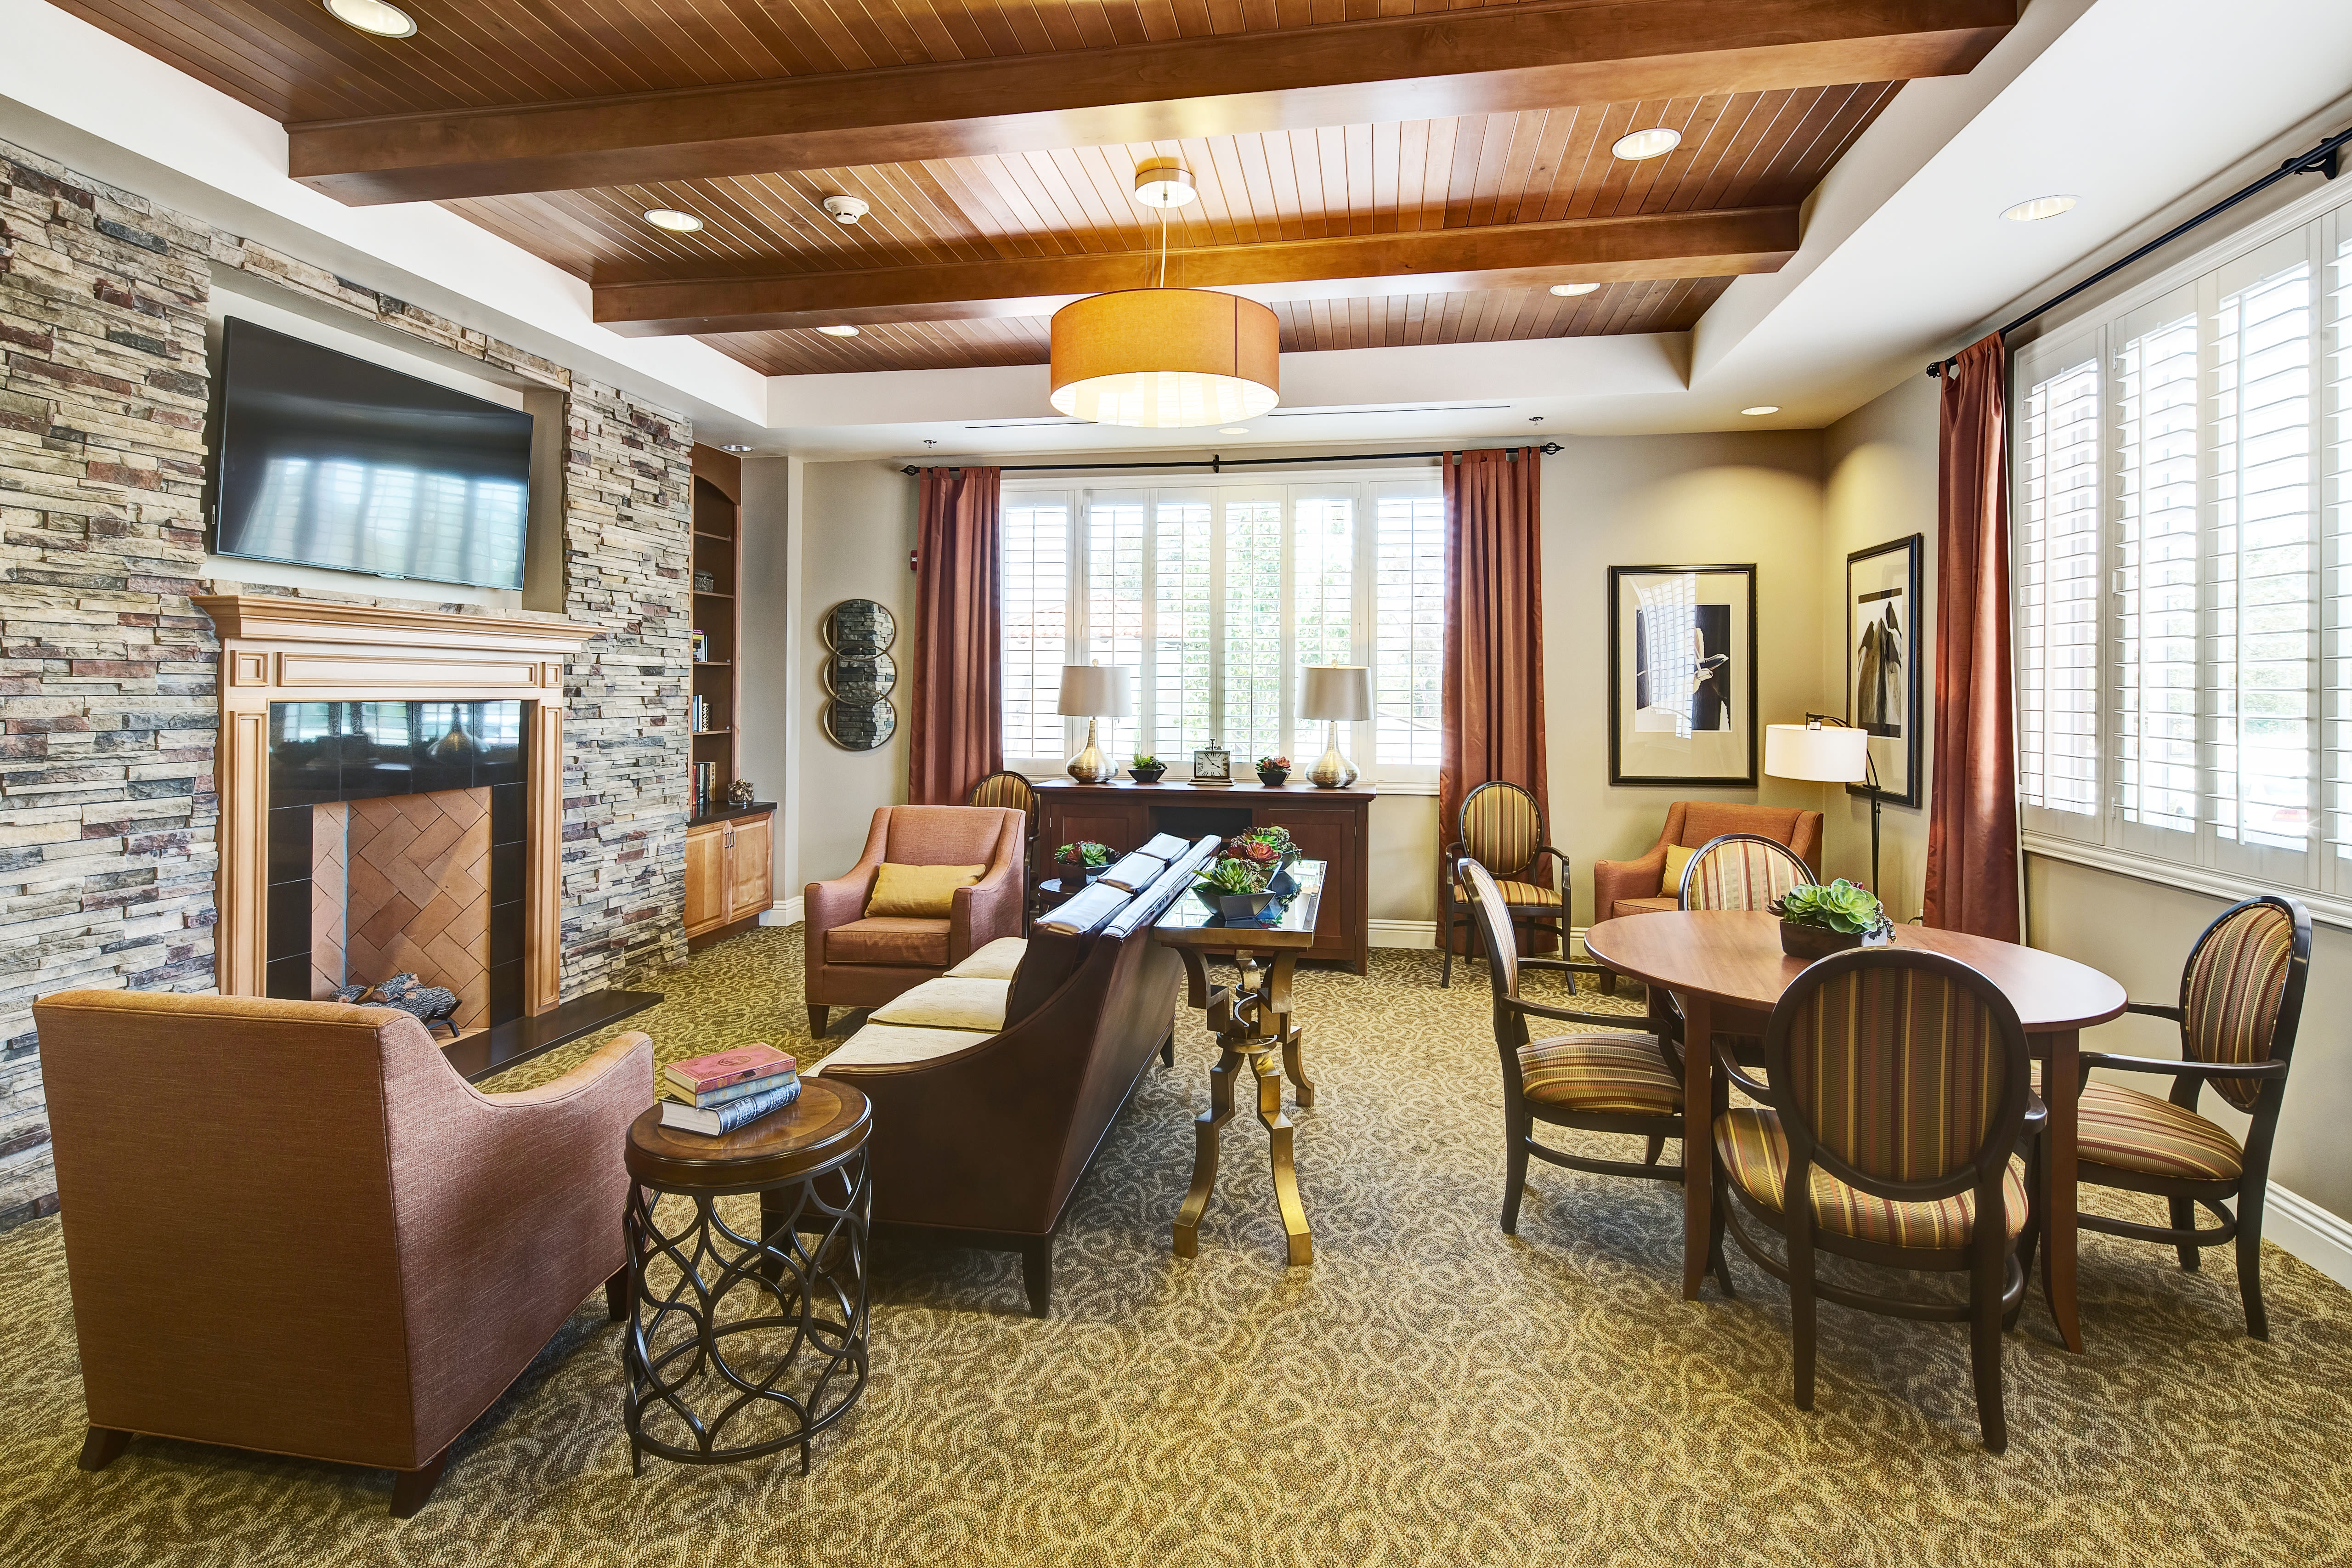 Our senior living community in Torrance, California offer a living space